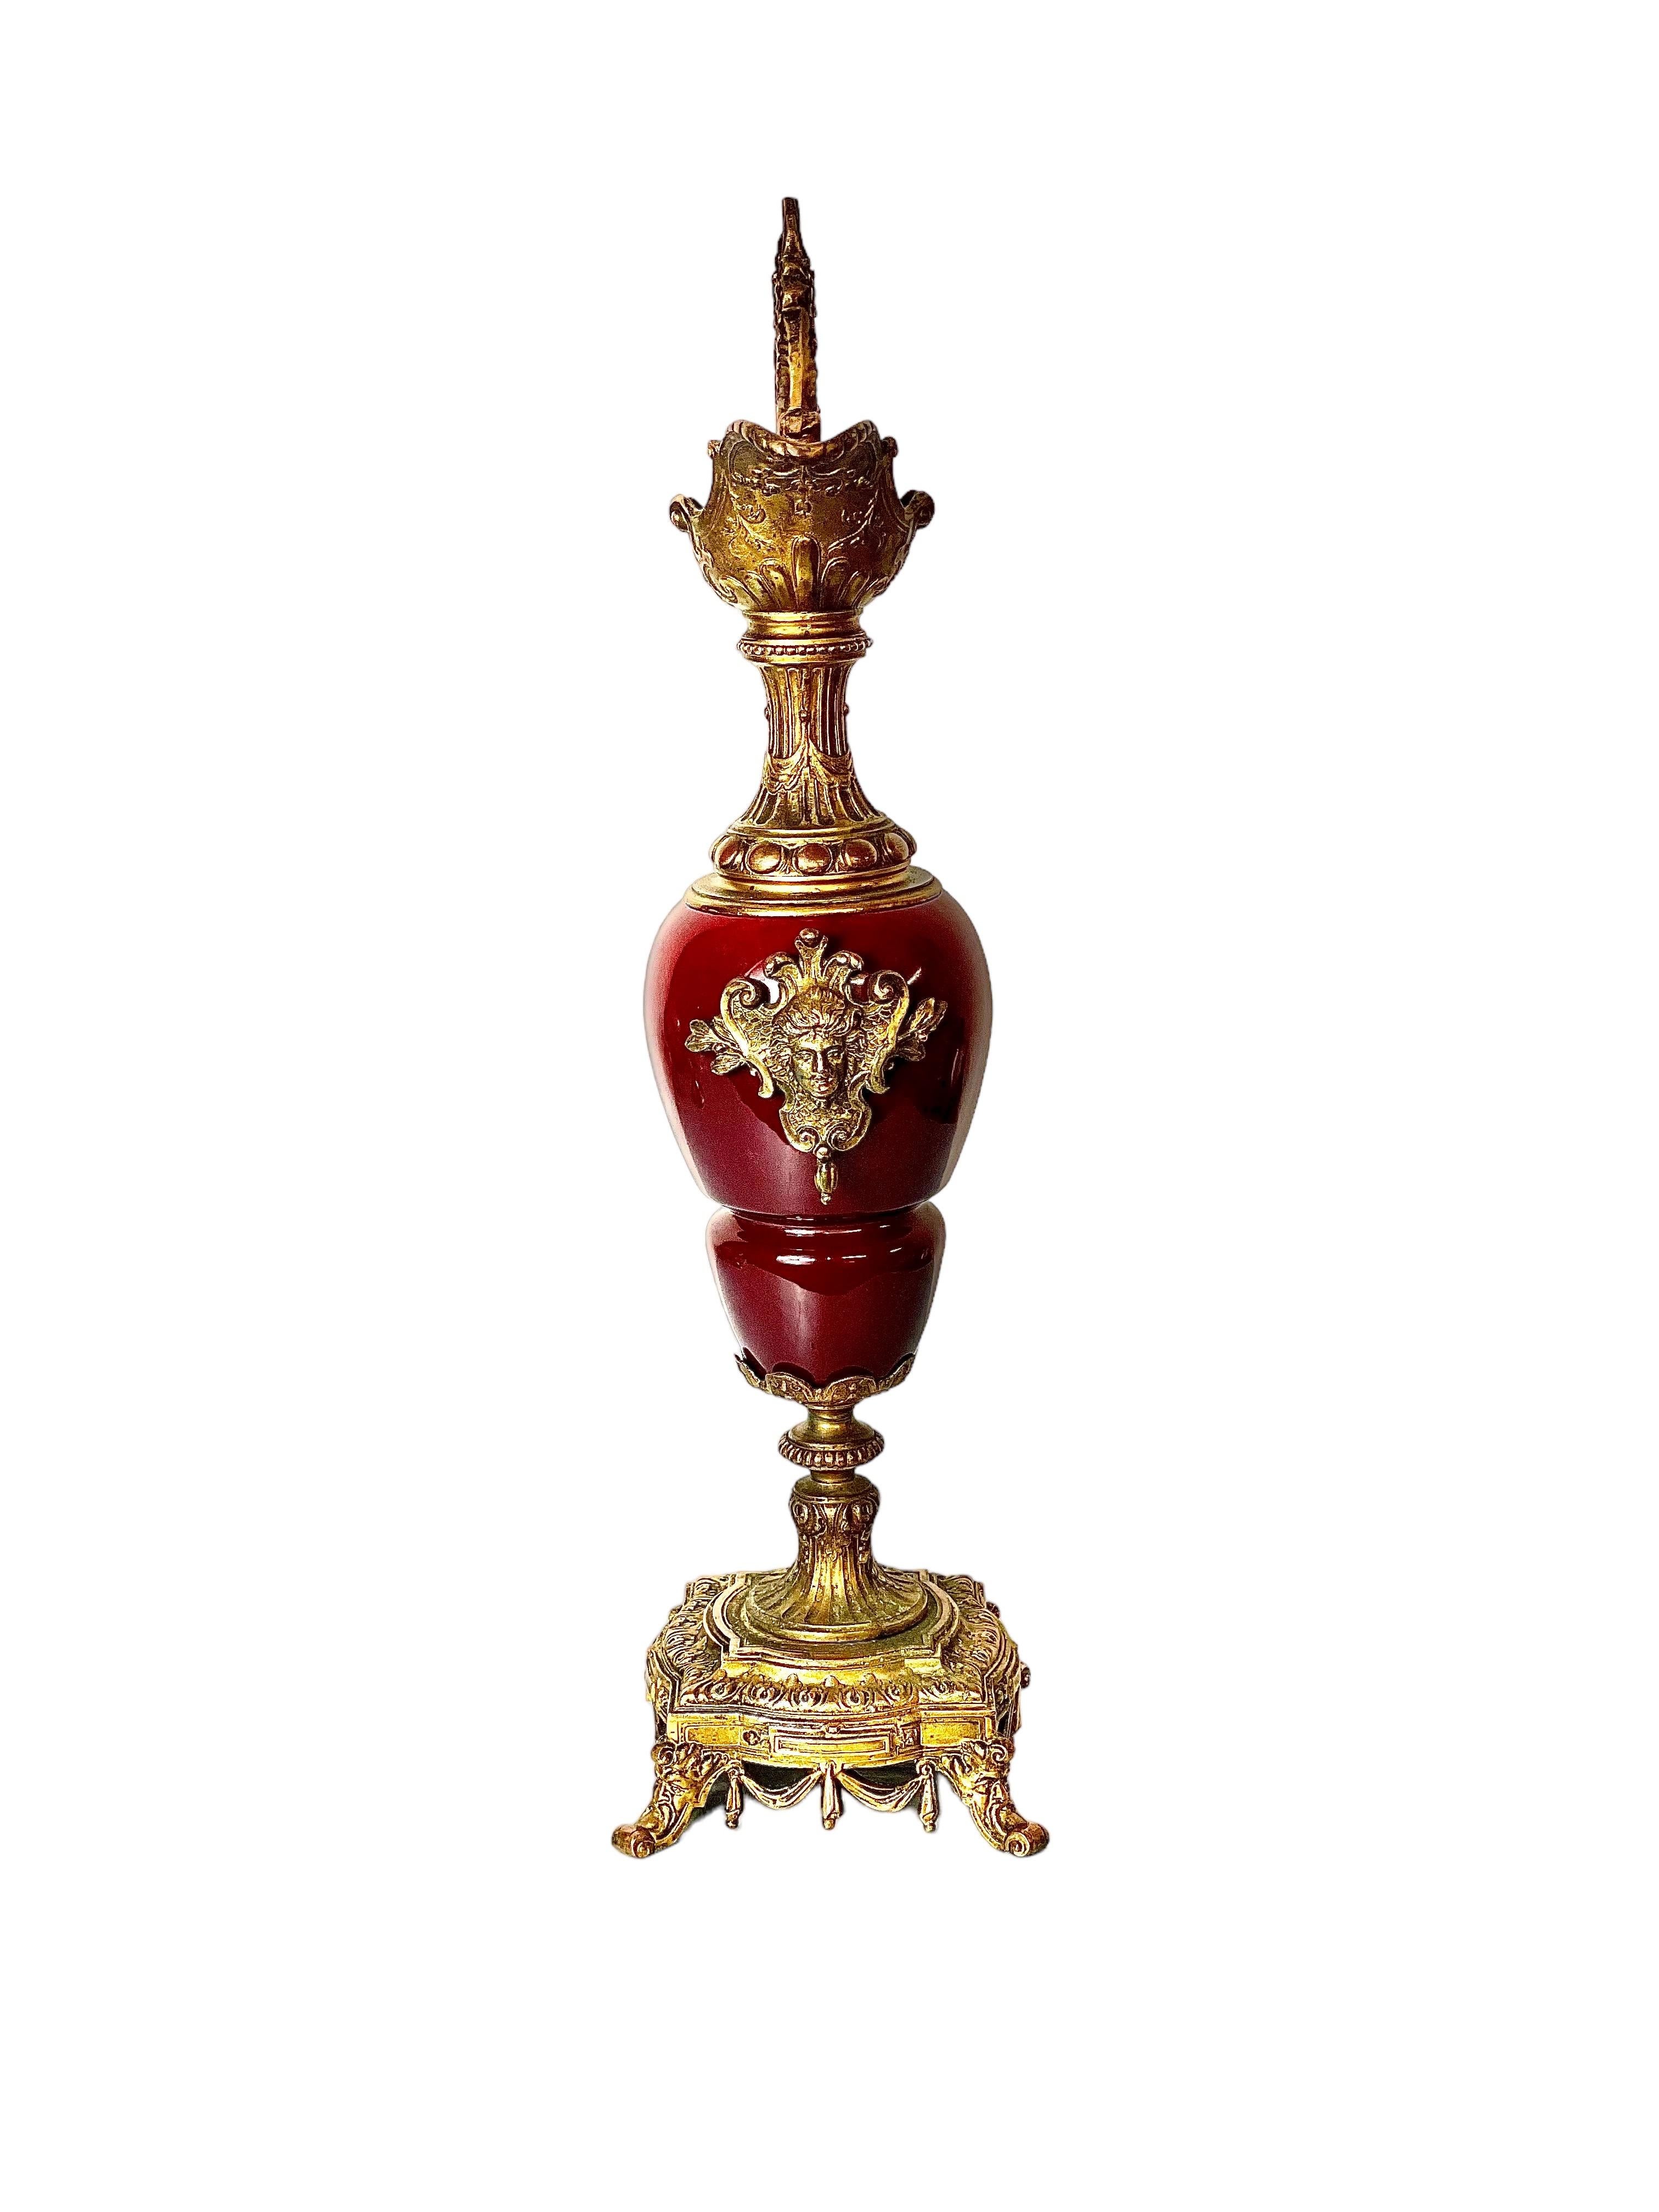 A very ornate French antique ewer urn with a gleaming, red ceramic jug body and gilt bronze foot and trimmings, dating from the beginning of the 20th century and modelled on the Renaissance style. This striking piece would originally have formed